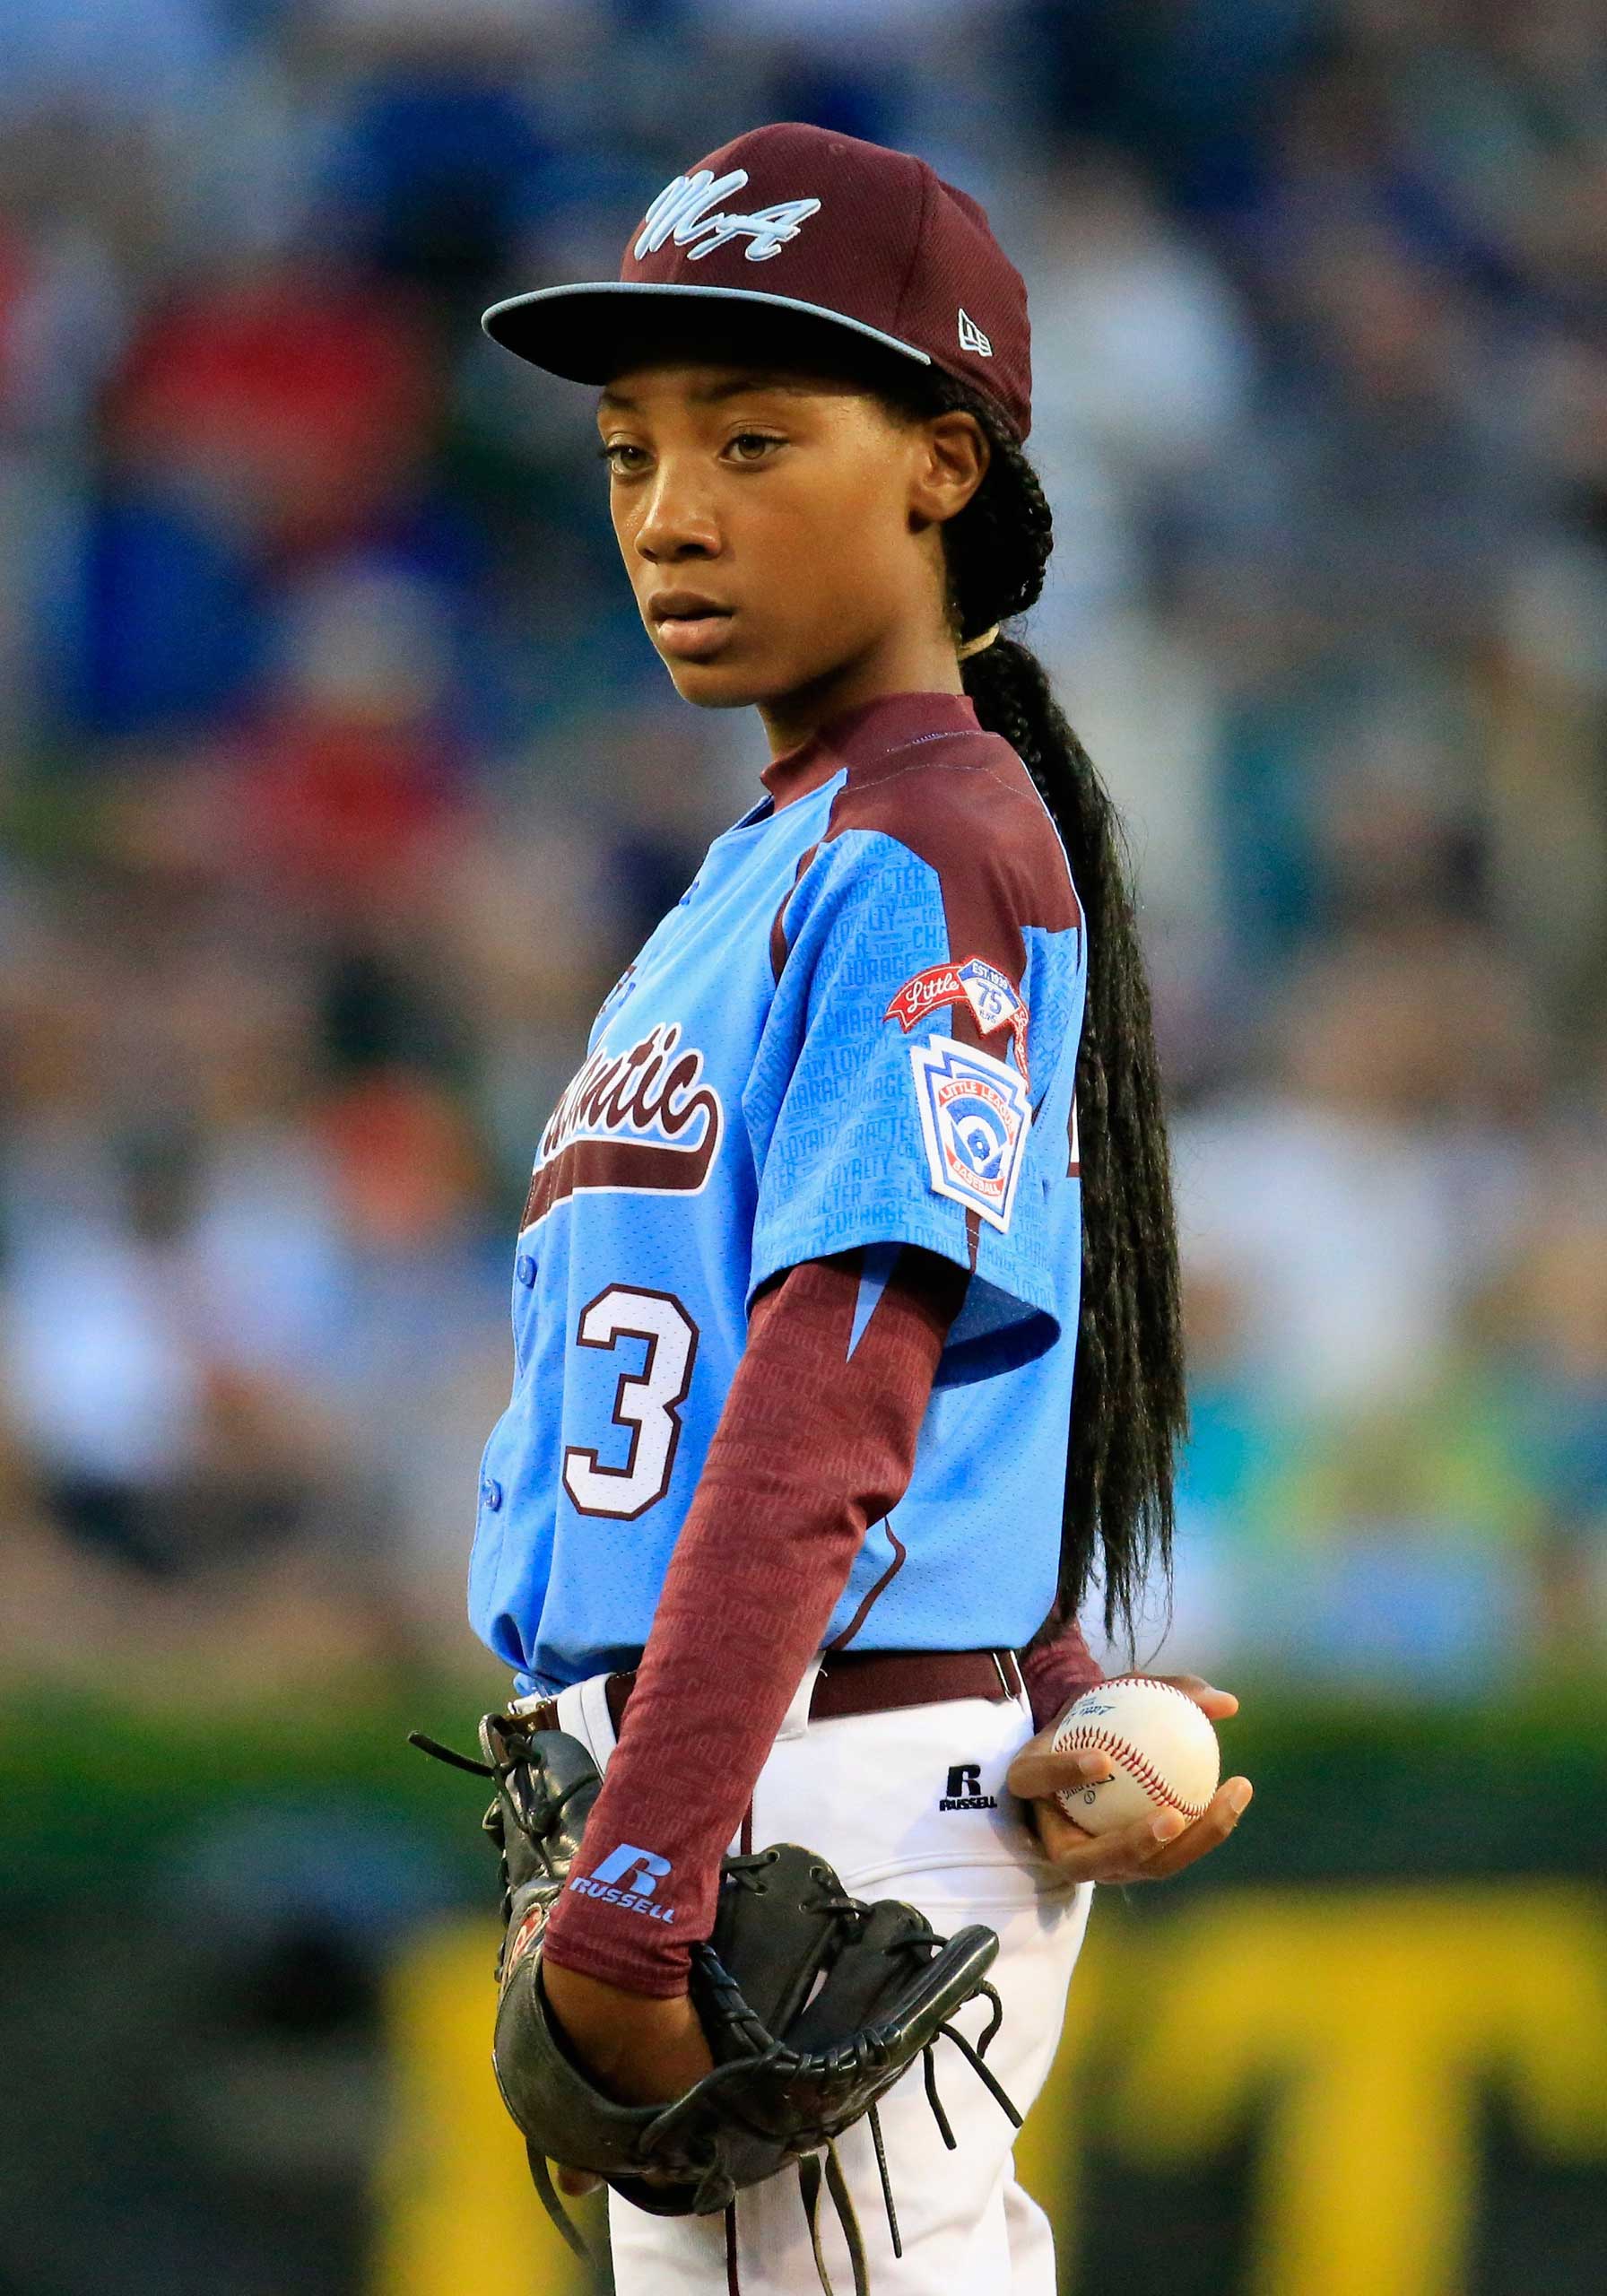 Mo'ne Davis #3 of Pennsylvania waits to pitch to a Nevada batter during the United States division game at the Little League World Series tournament at Lamade Stadium on August 20, 2014 in South Williamsport, Pennsylvania. (Photo by Rob Carr/Getty Images) *** Local Caption *** Mo'ne Davis